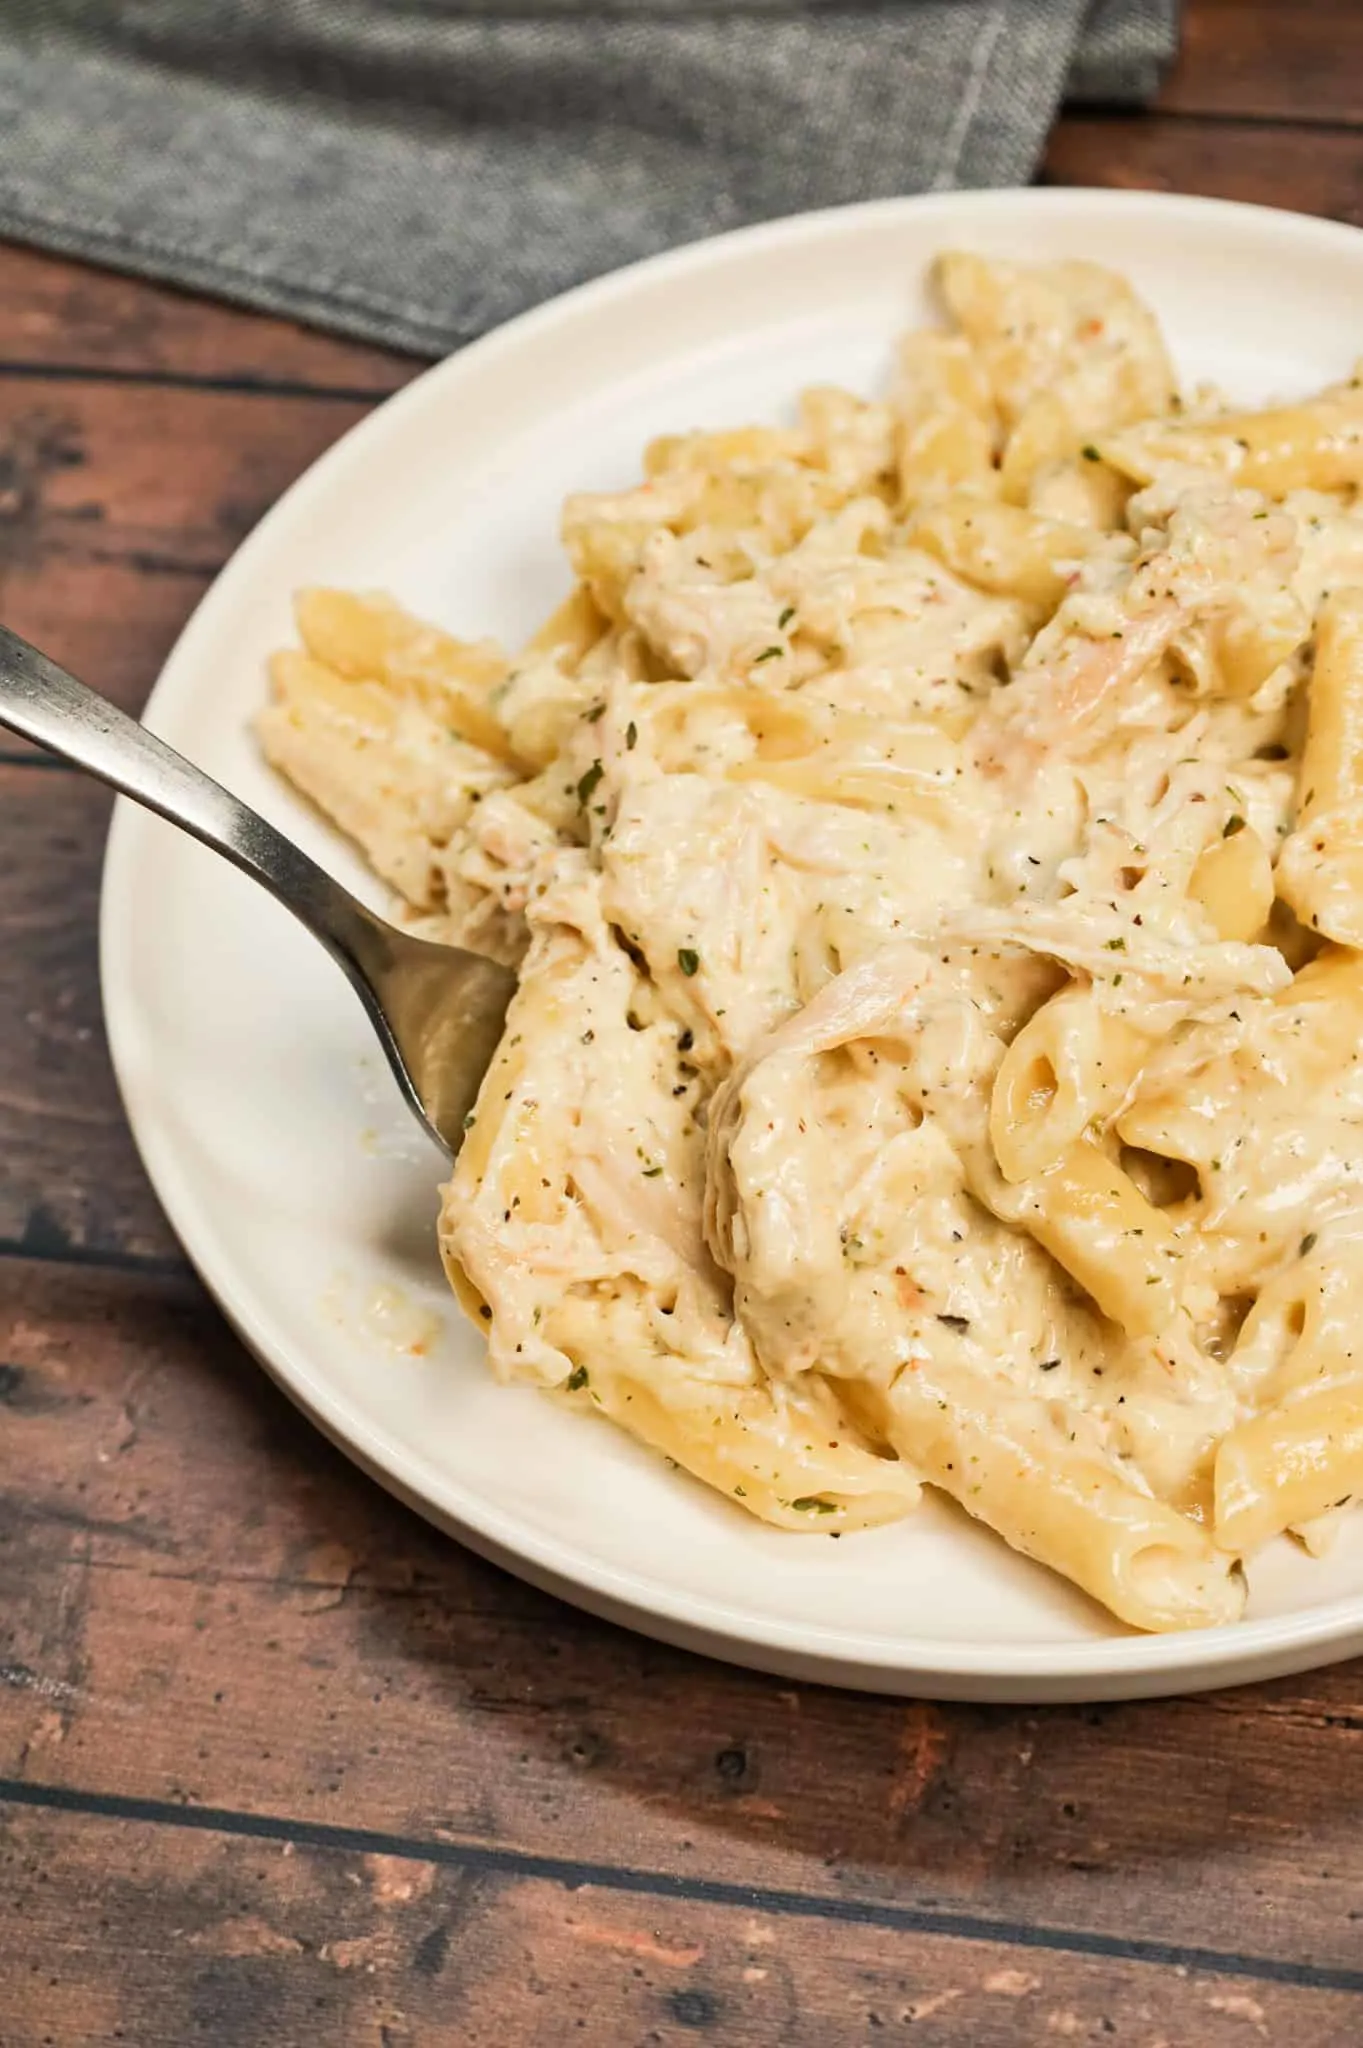 Chicken Alfredo Penne is an easy stove top pasta recipe loaded with shredded rotisserie chicken all tossed in a creamy garlic parmesan sauce.